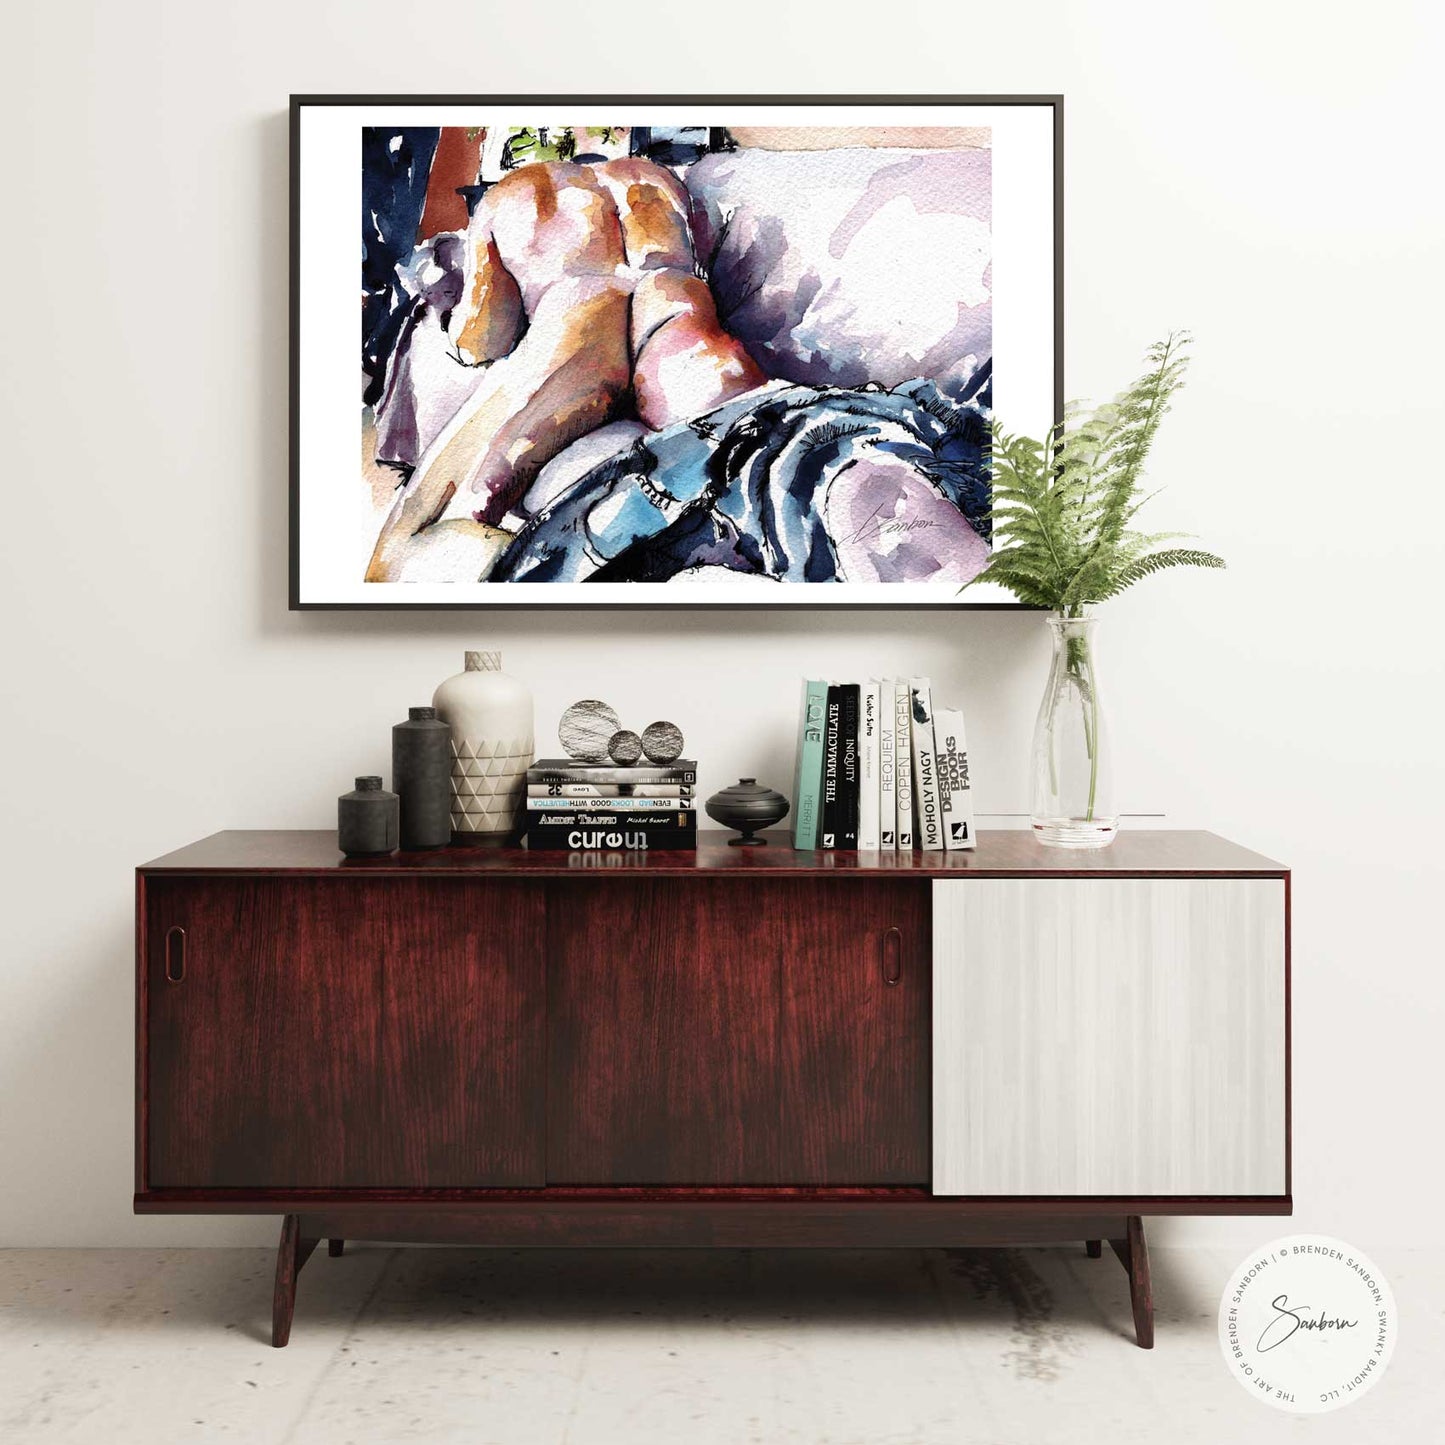 Face Down Muscular Male, Revealing Pose, Couch Setting - Giclee Art Print